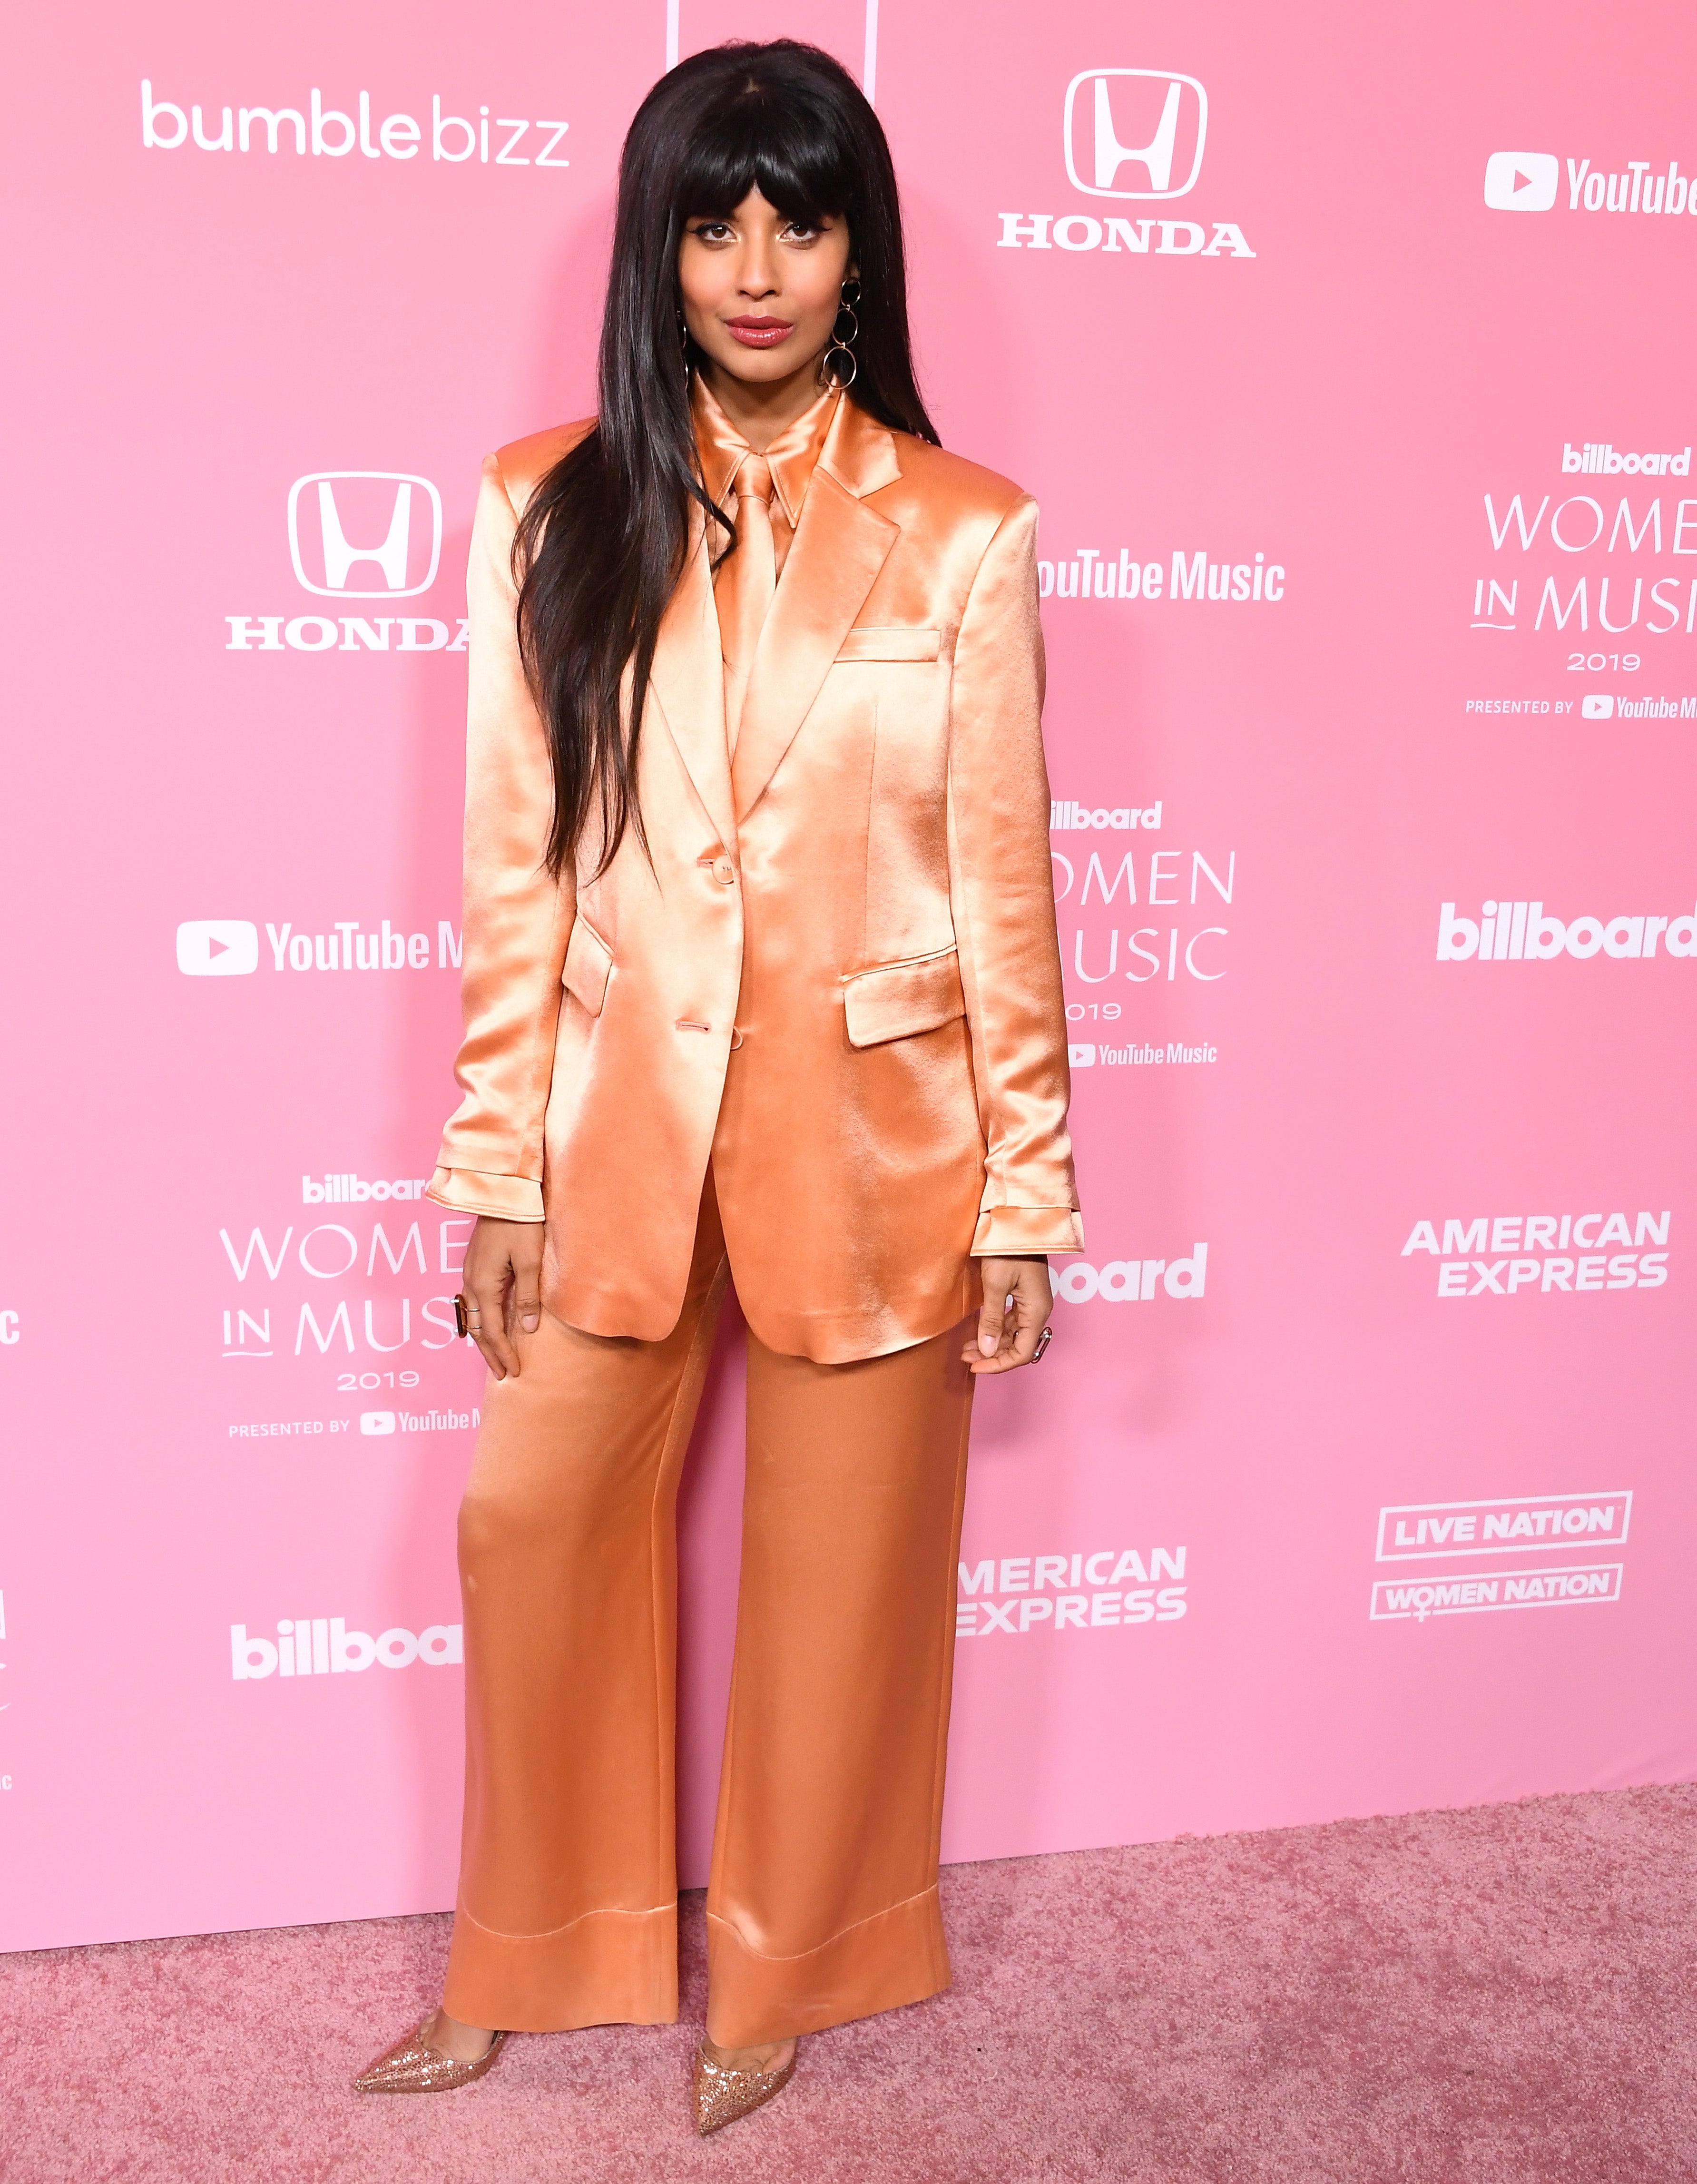 The Best Fashion Moments At The 2019 Billboard 'Women In Music' Awards